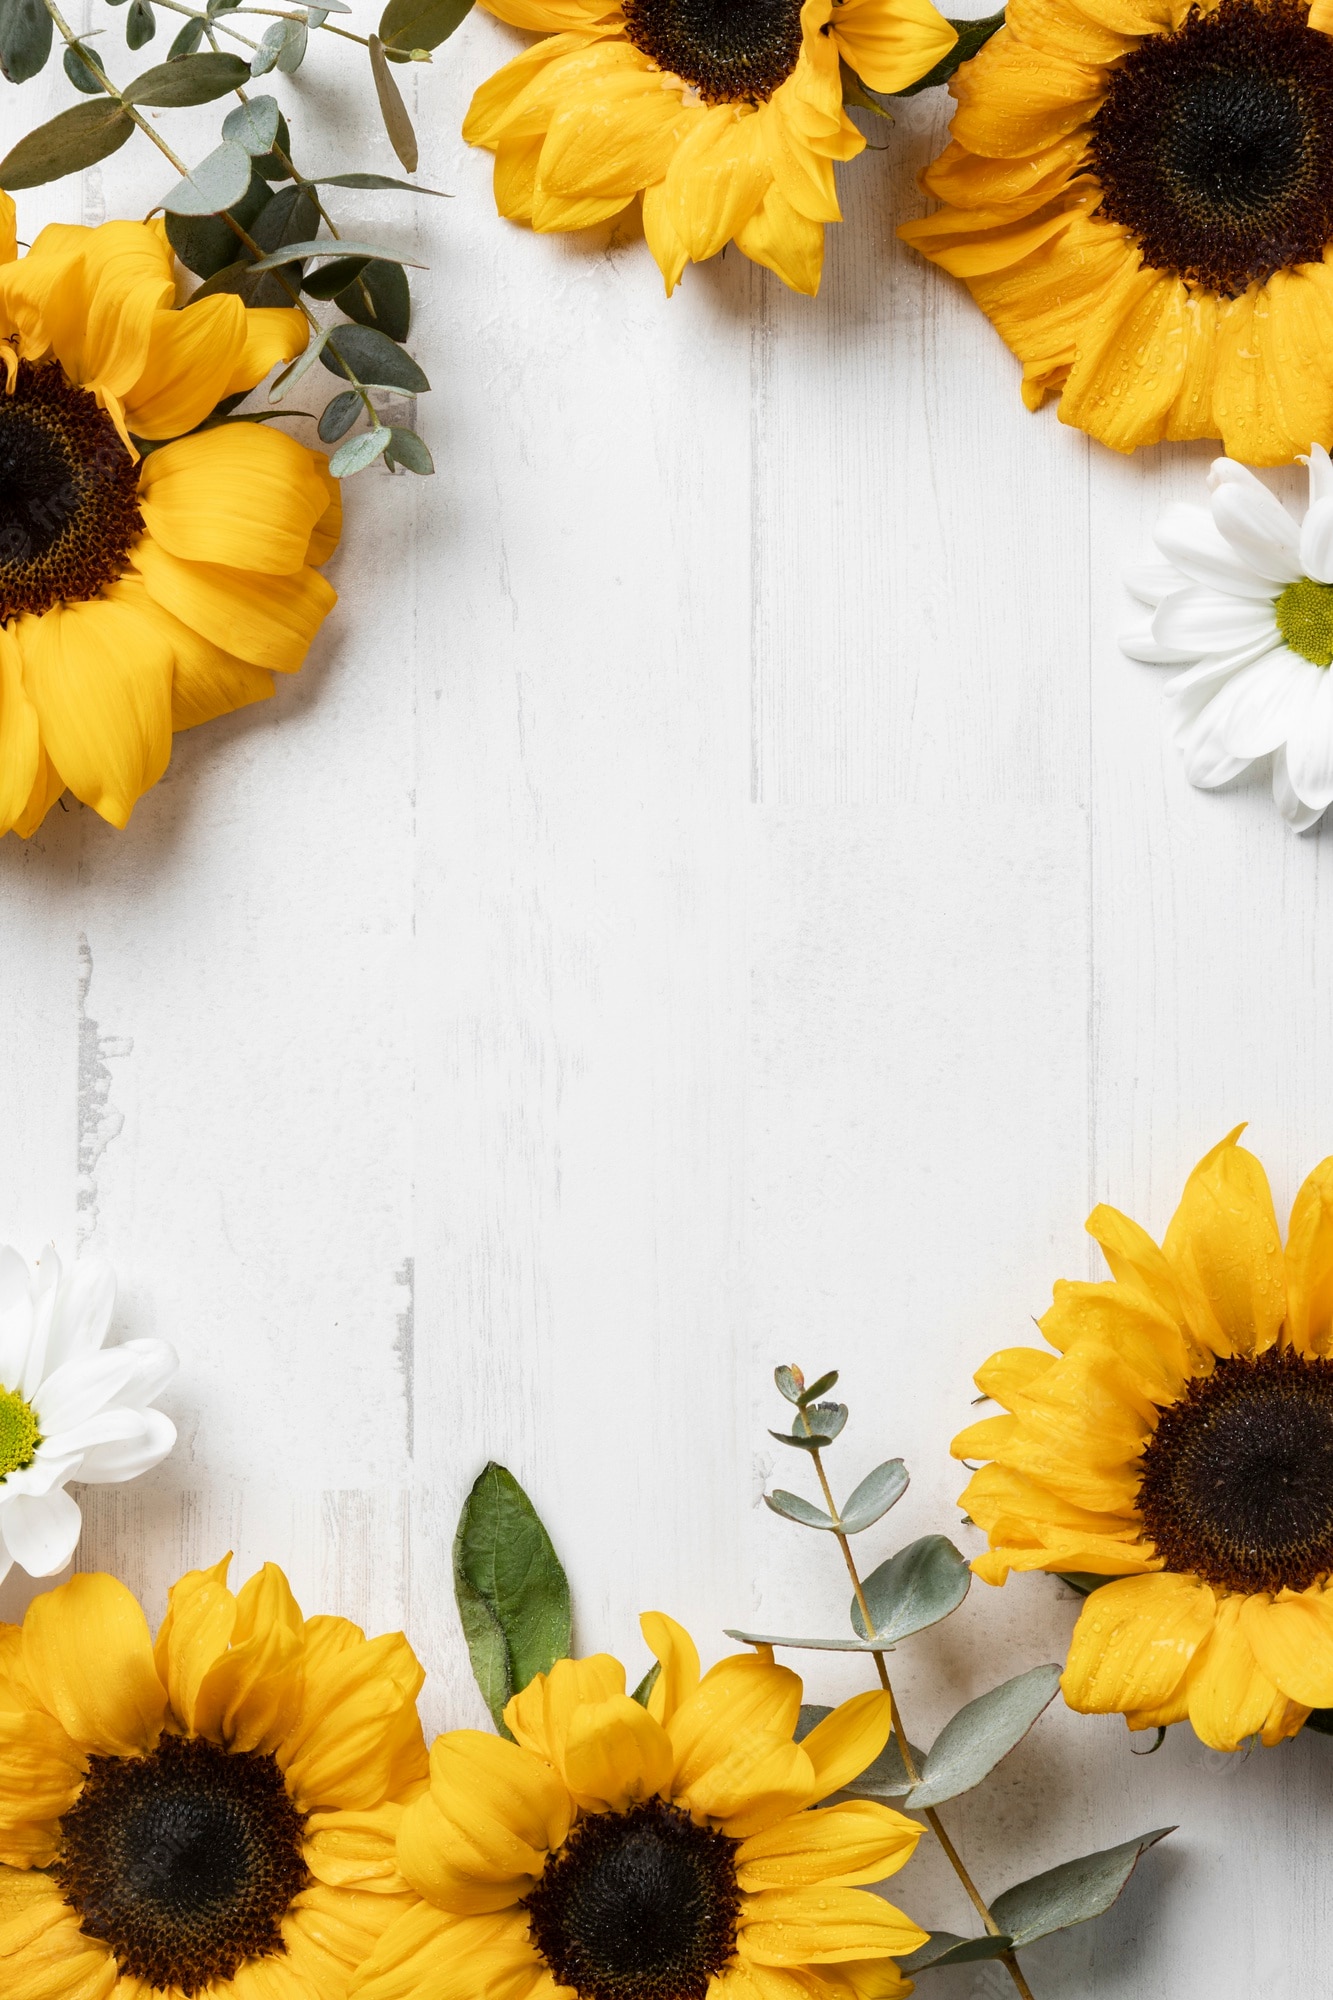 Colorful Sunflower Wallpapers